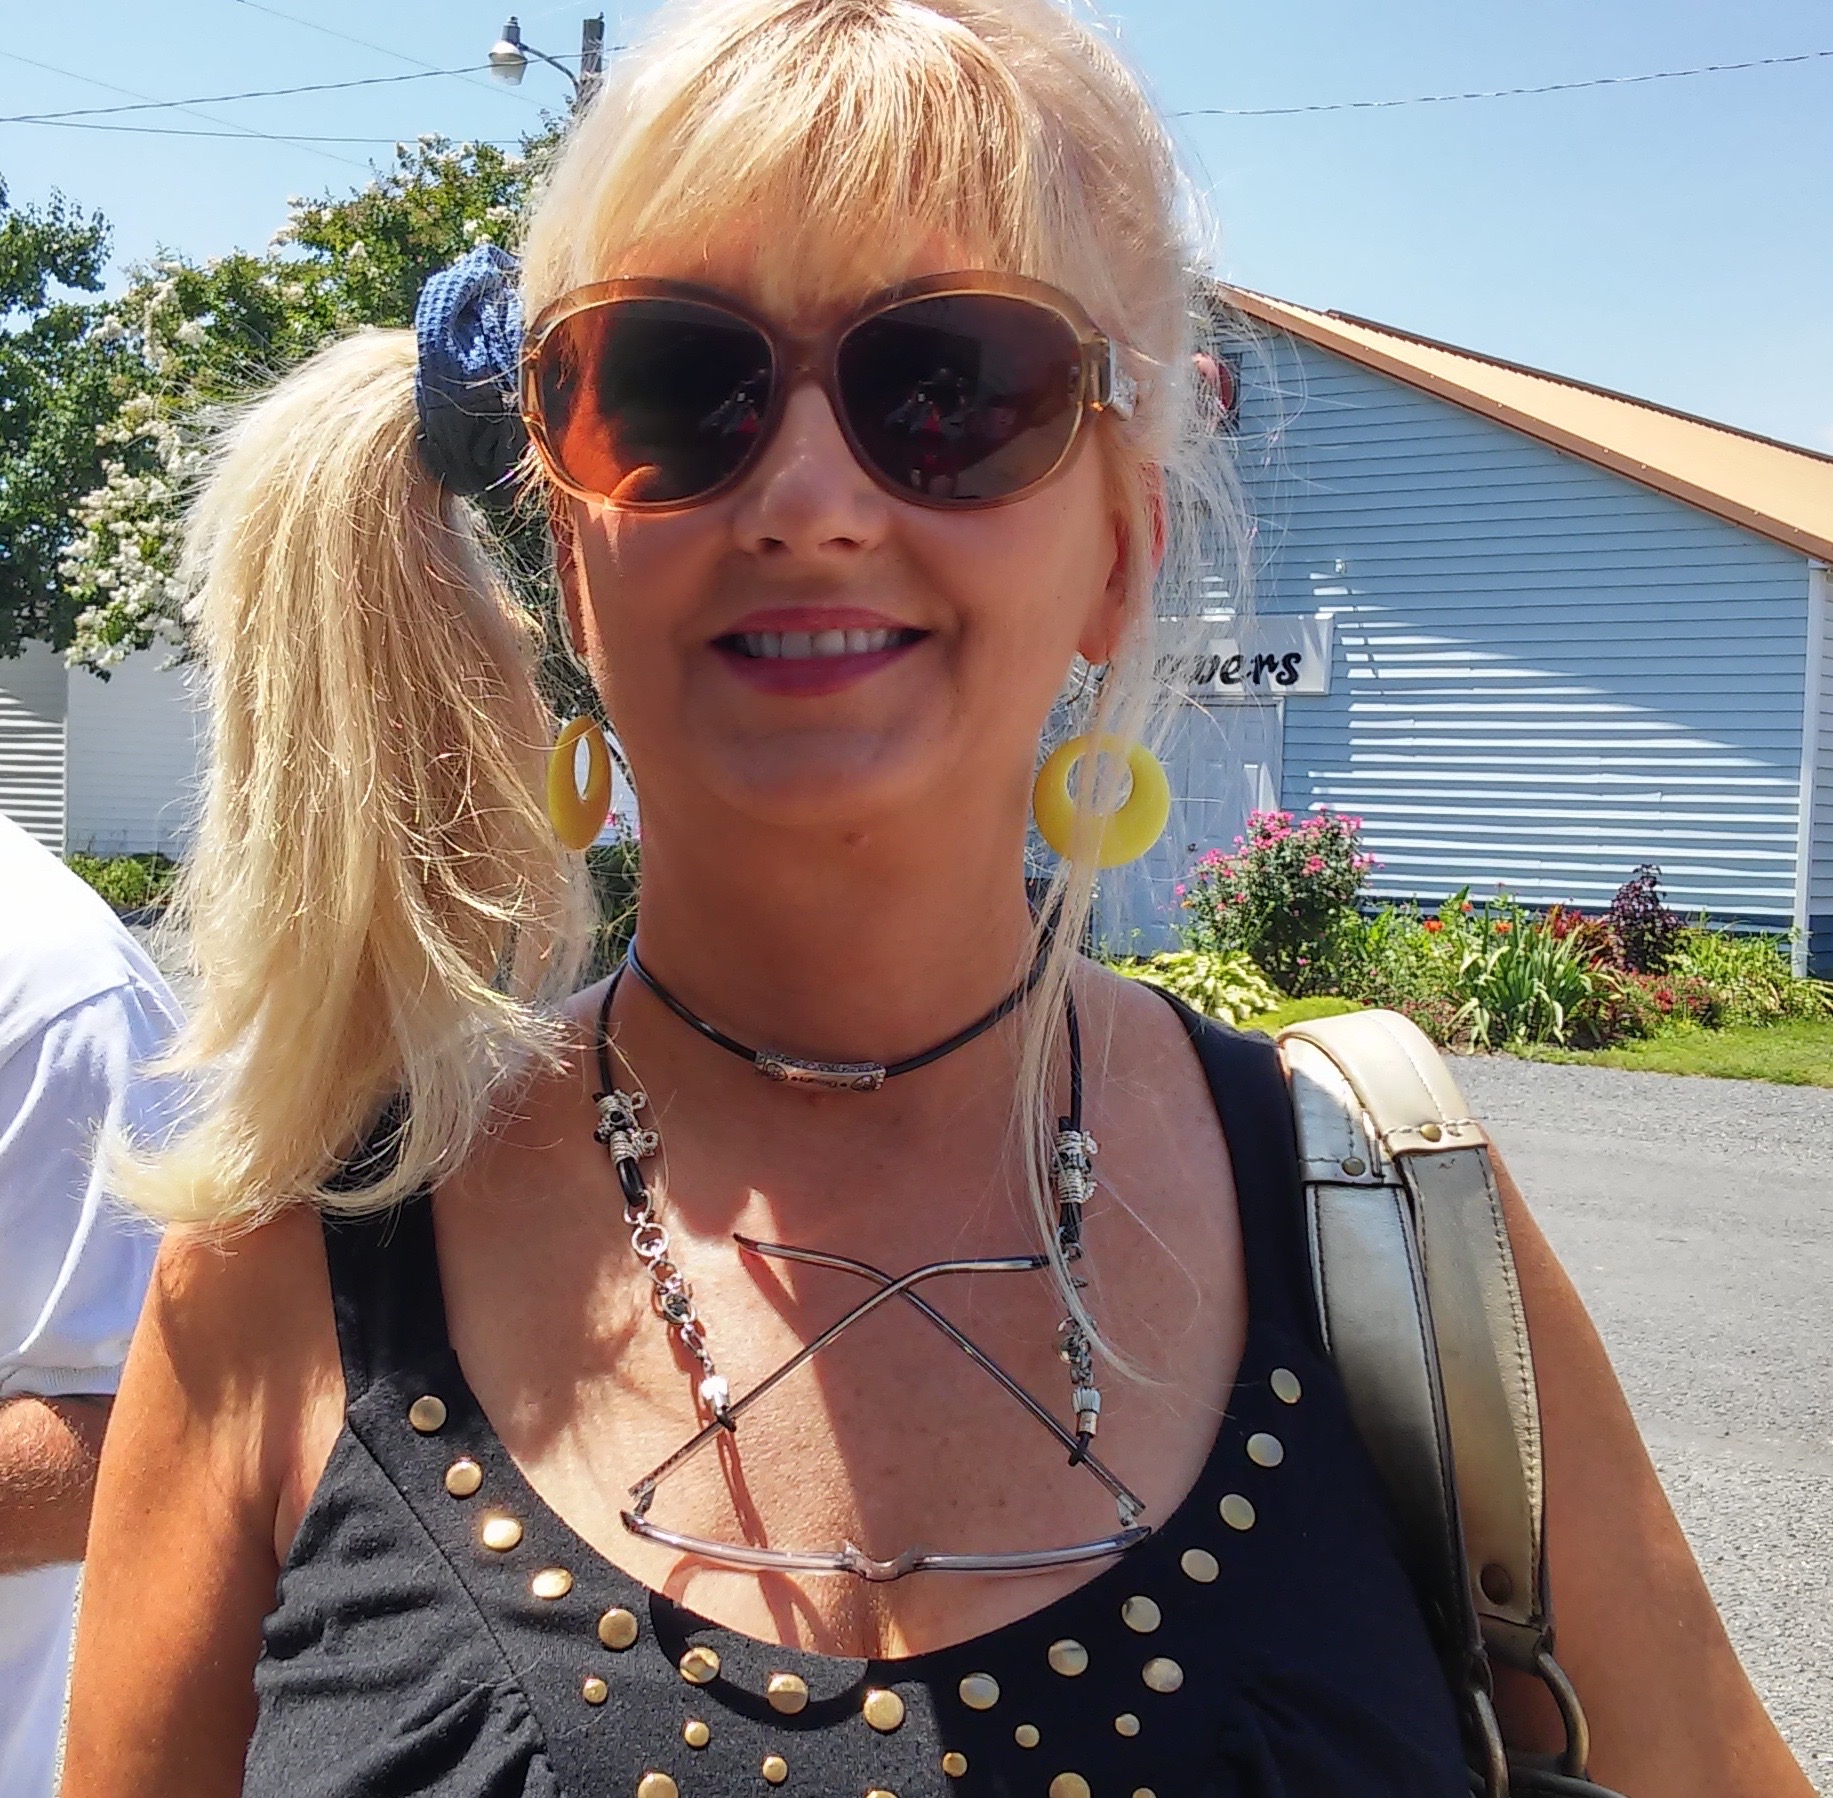 Southern Maryland Brewery Festival 2015- Customer Poses with Nikus Eyeglass Chain